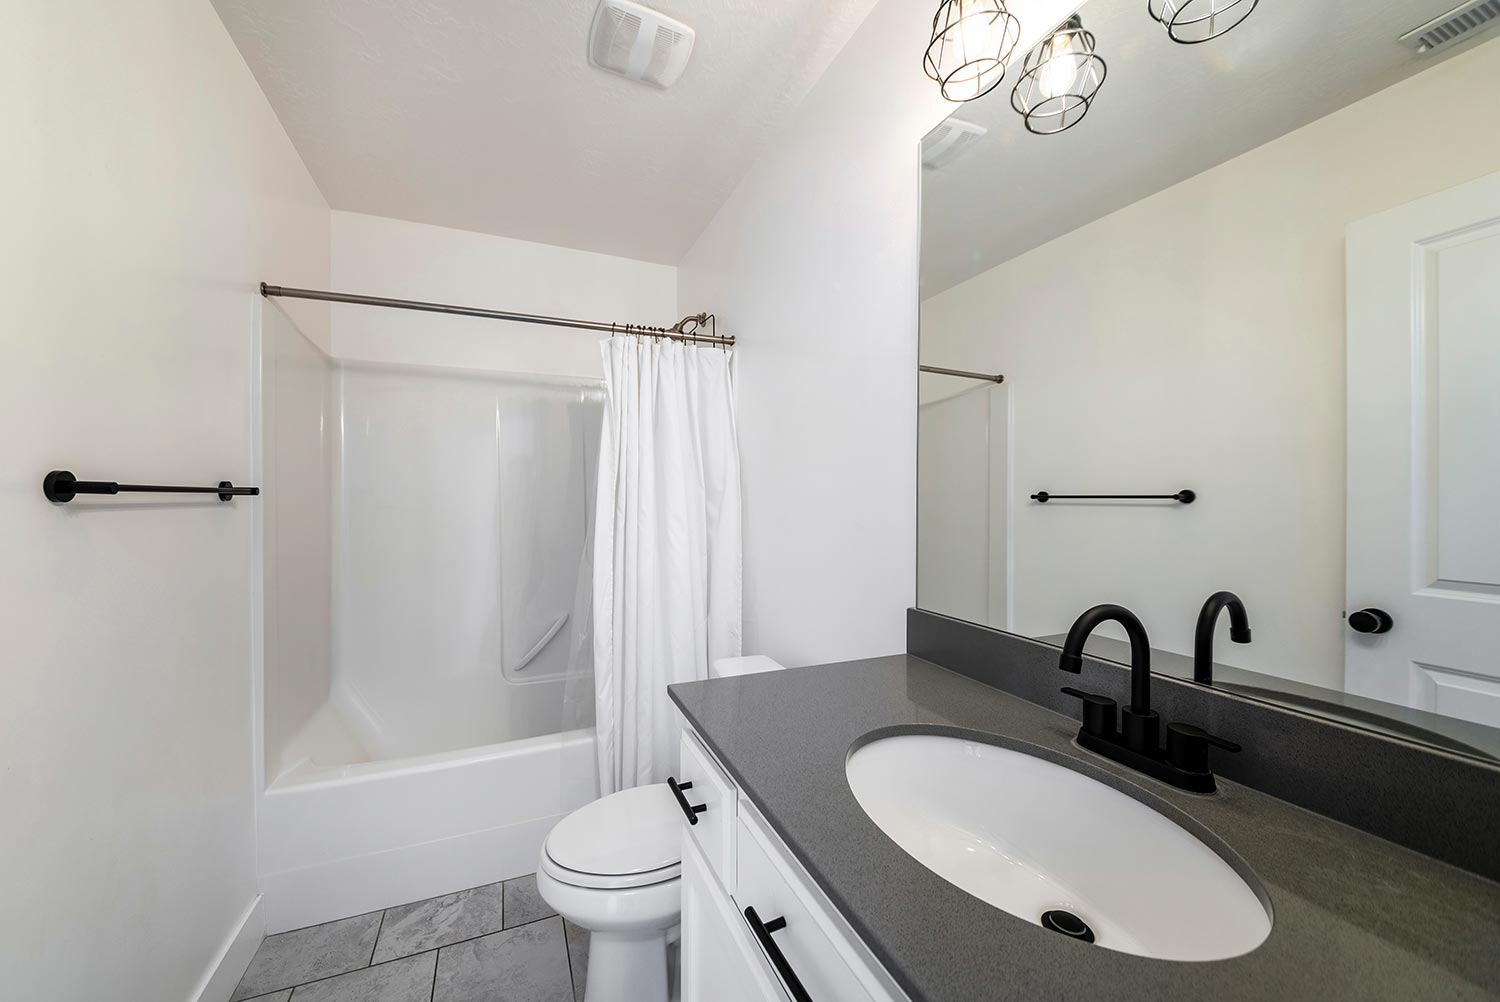 Bathroom interior with black fixtures and one piece shower tub with white shower curtain